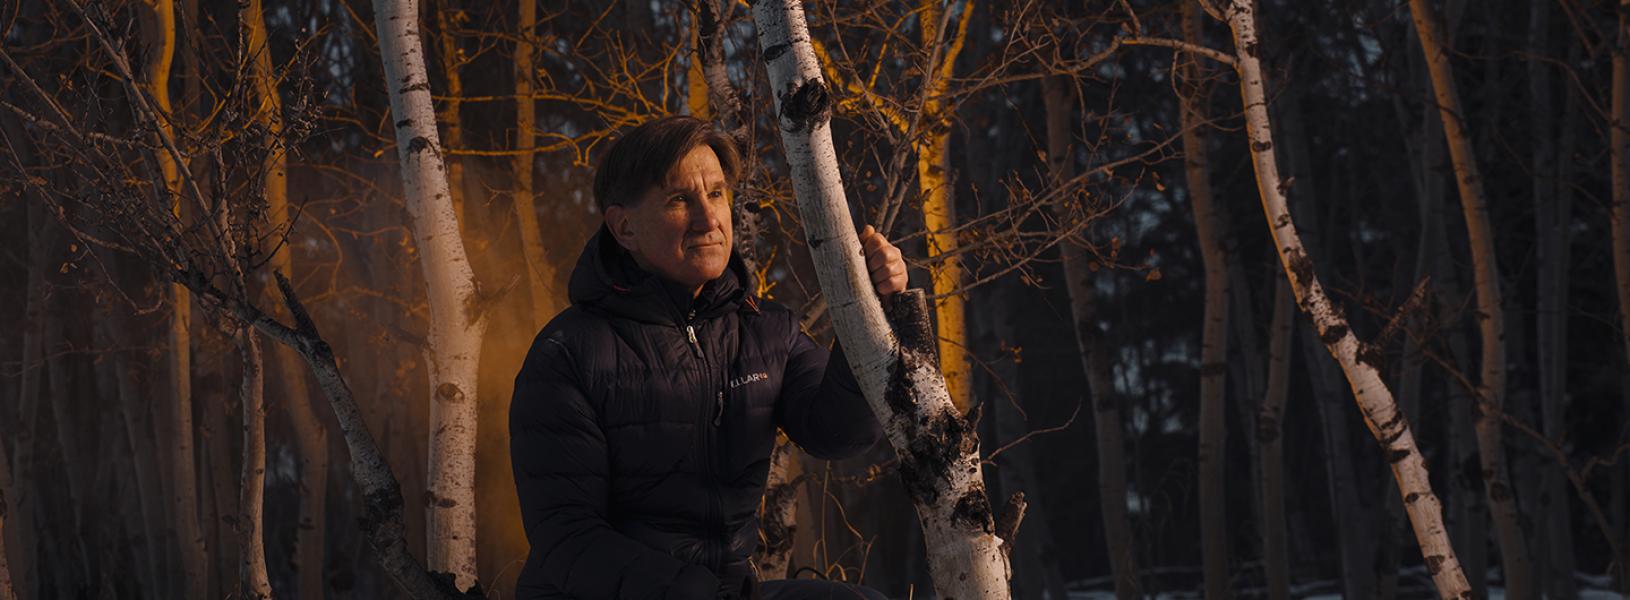 Edward Struzik is crouching in the woods wearing a winter jacket. He is surrounded by trees with a reflection of the light from a fire appearing behind him.